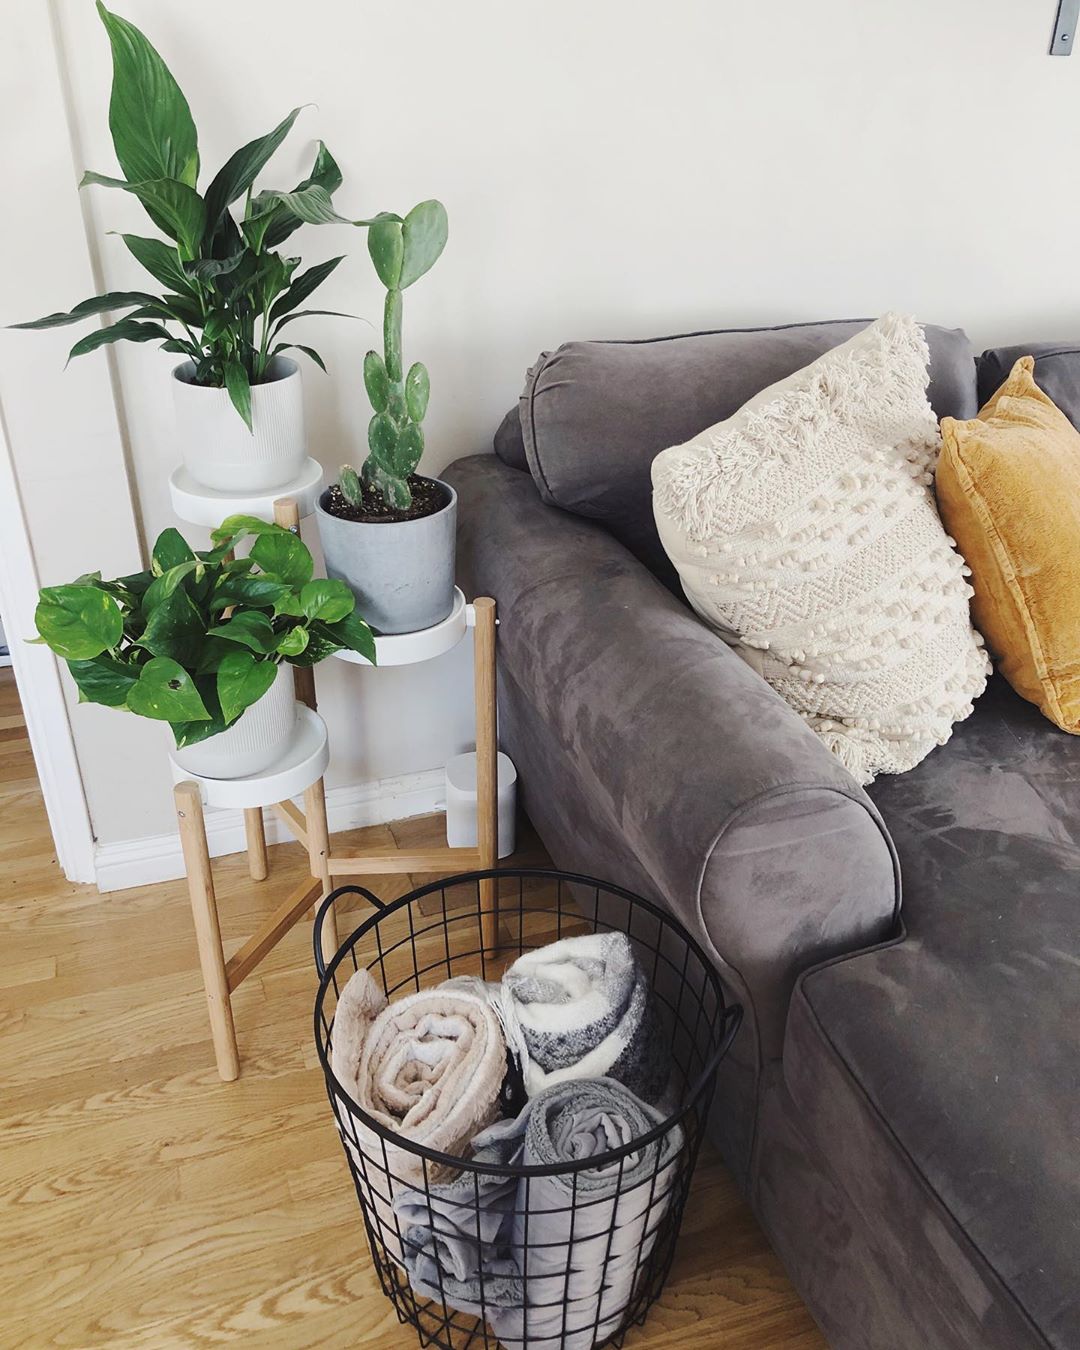 Living room furniture next to plants and basket of blankets. Photo by Instagram user @brilindesign